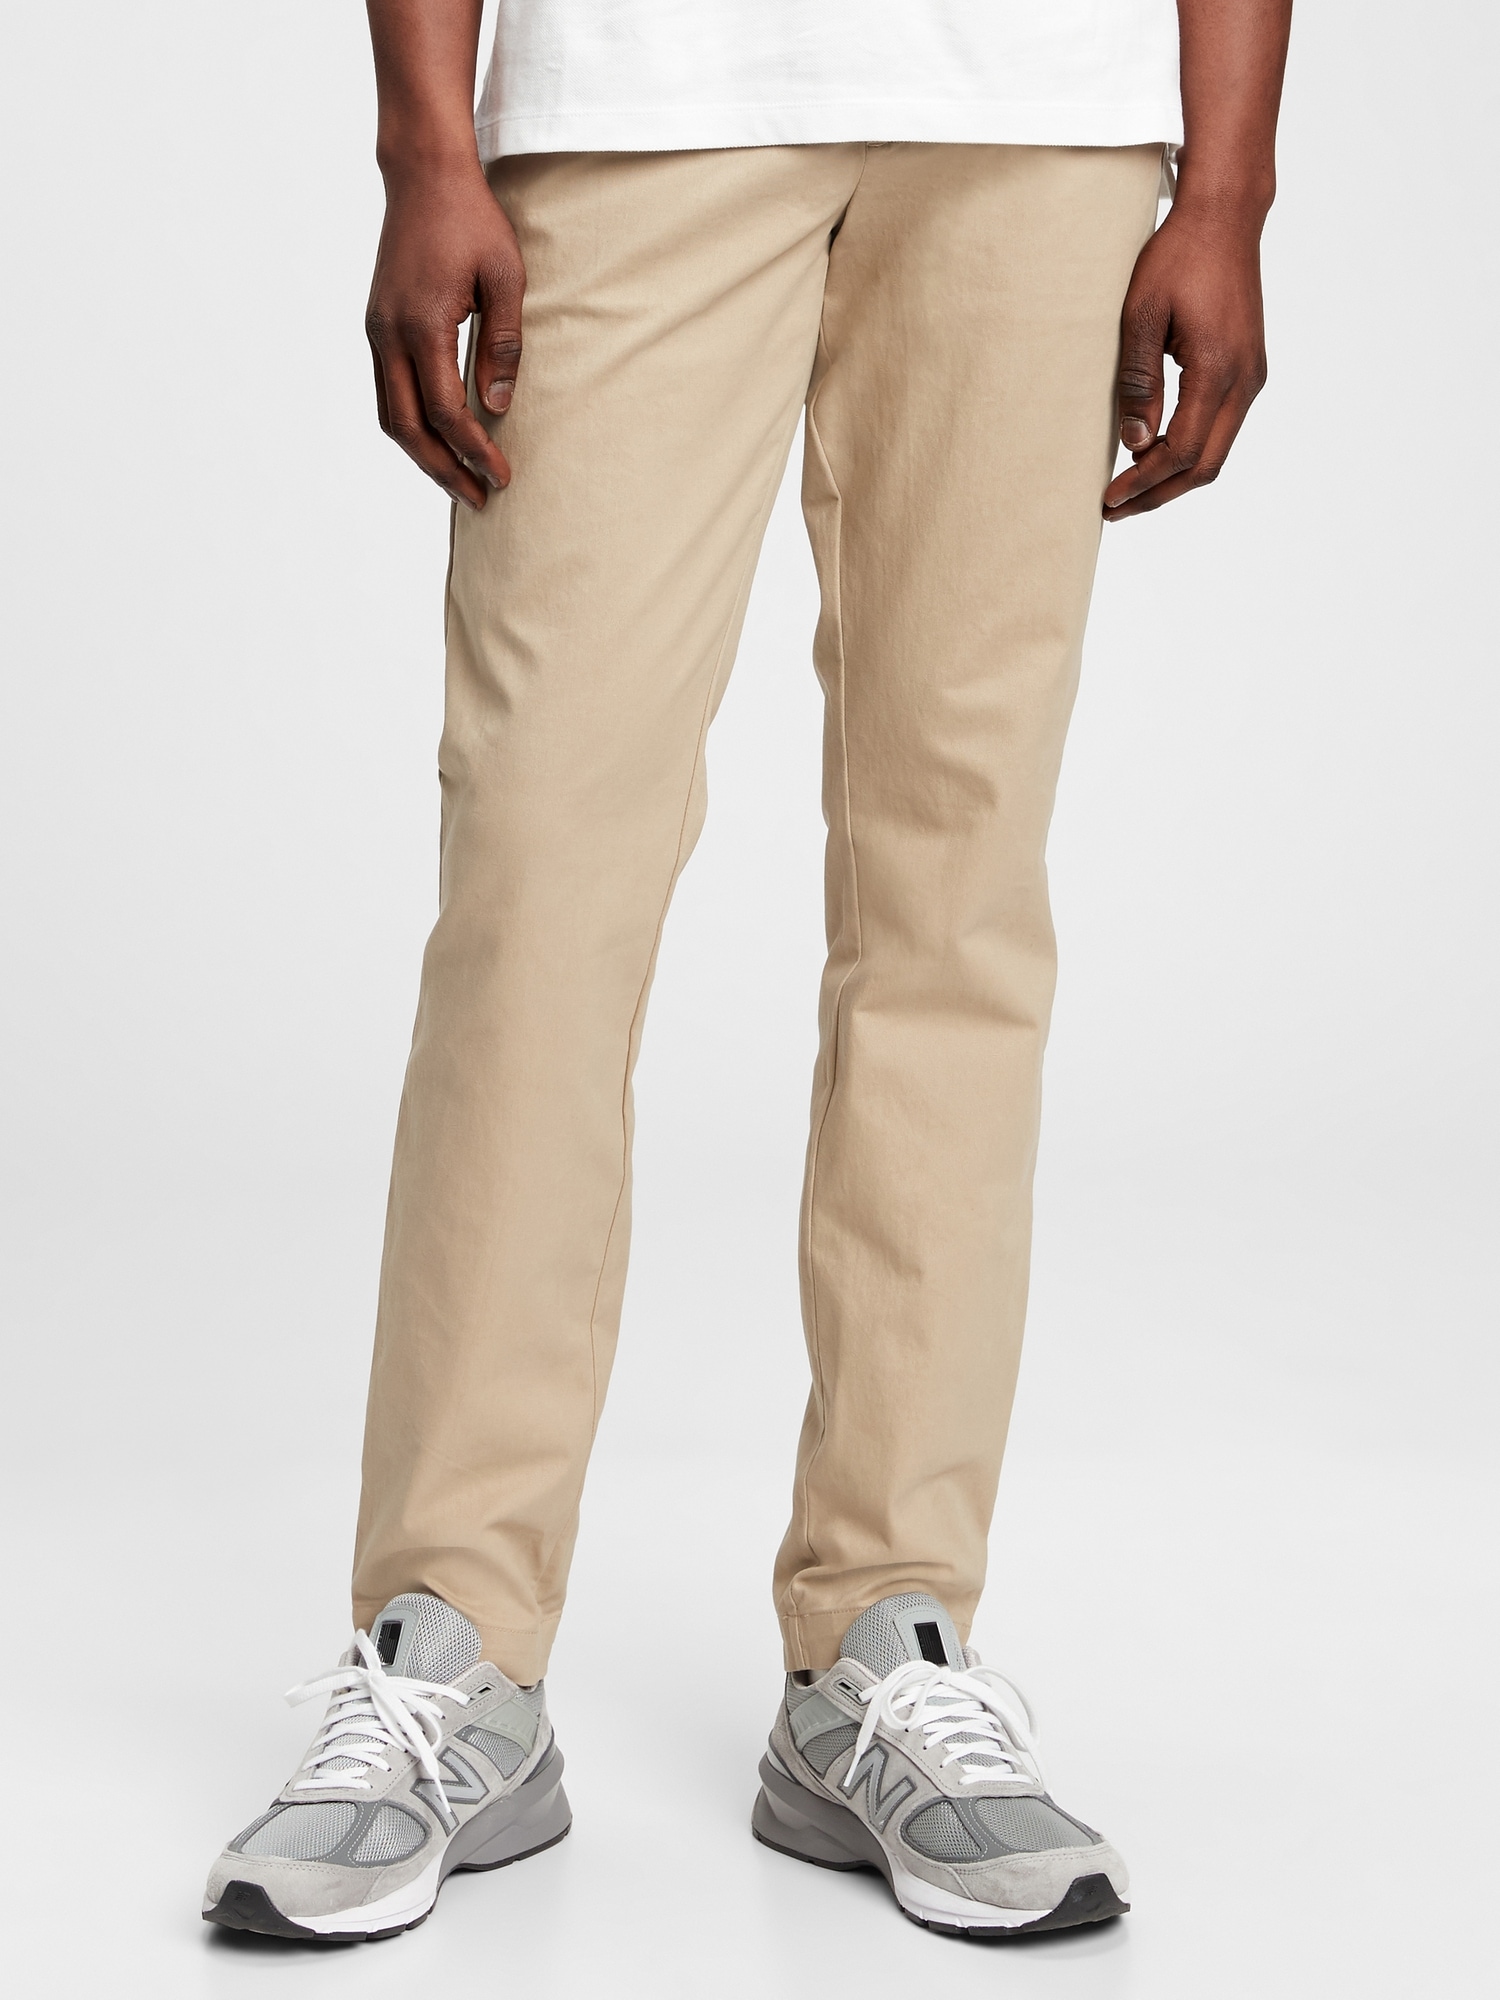 Gap Khakis Pants Mens 37X28 Mission Tan Lived in Relaxed #22F